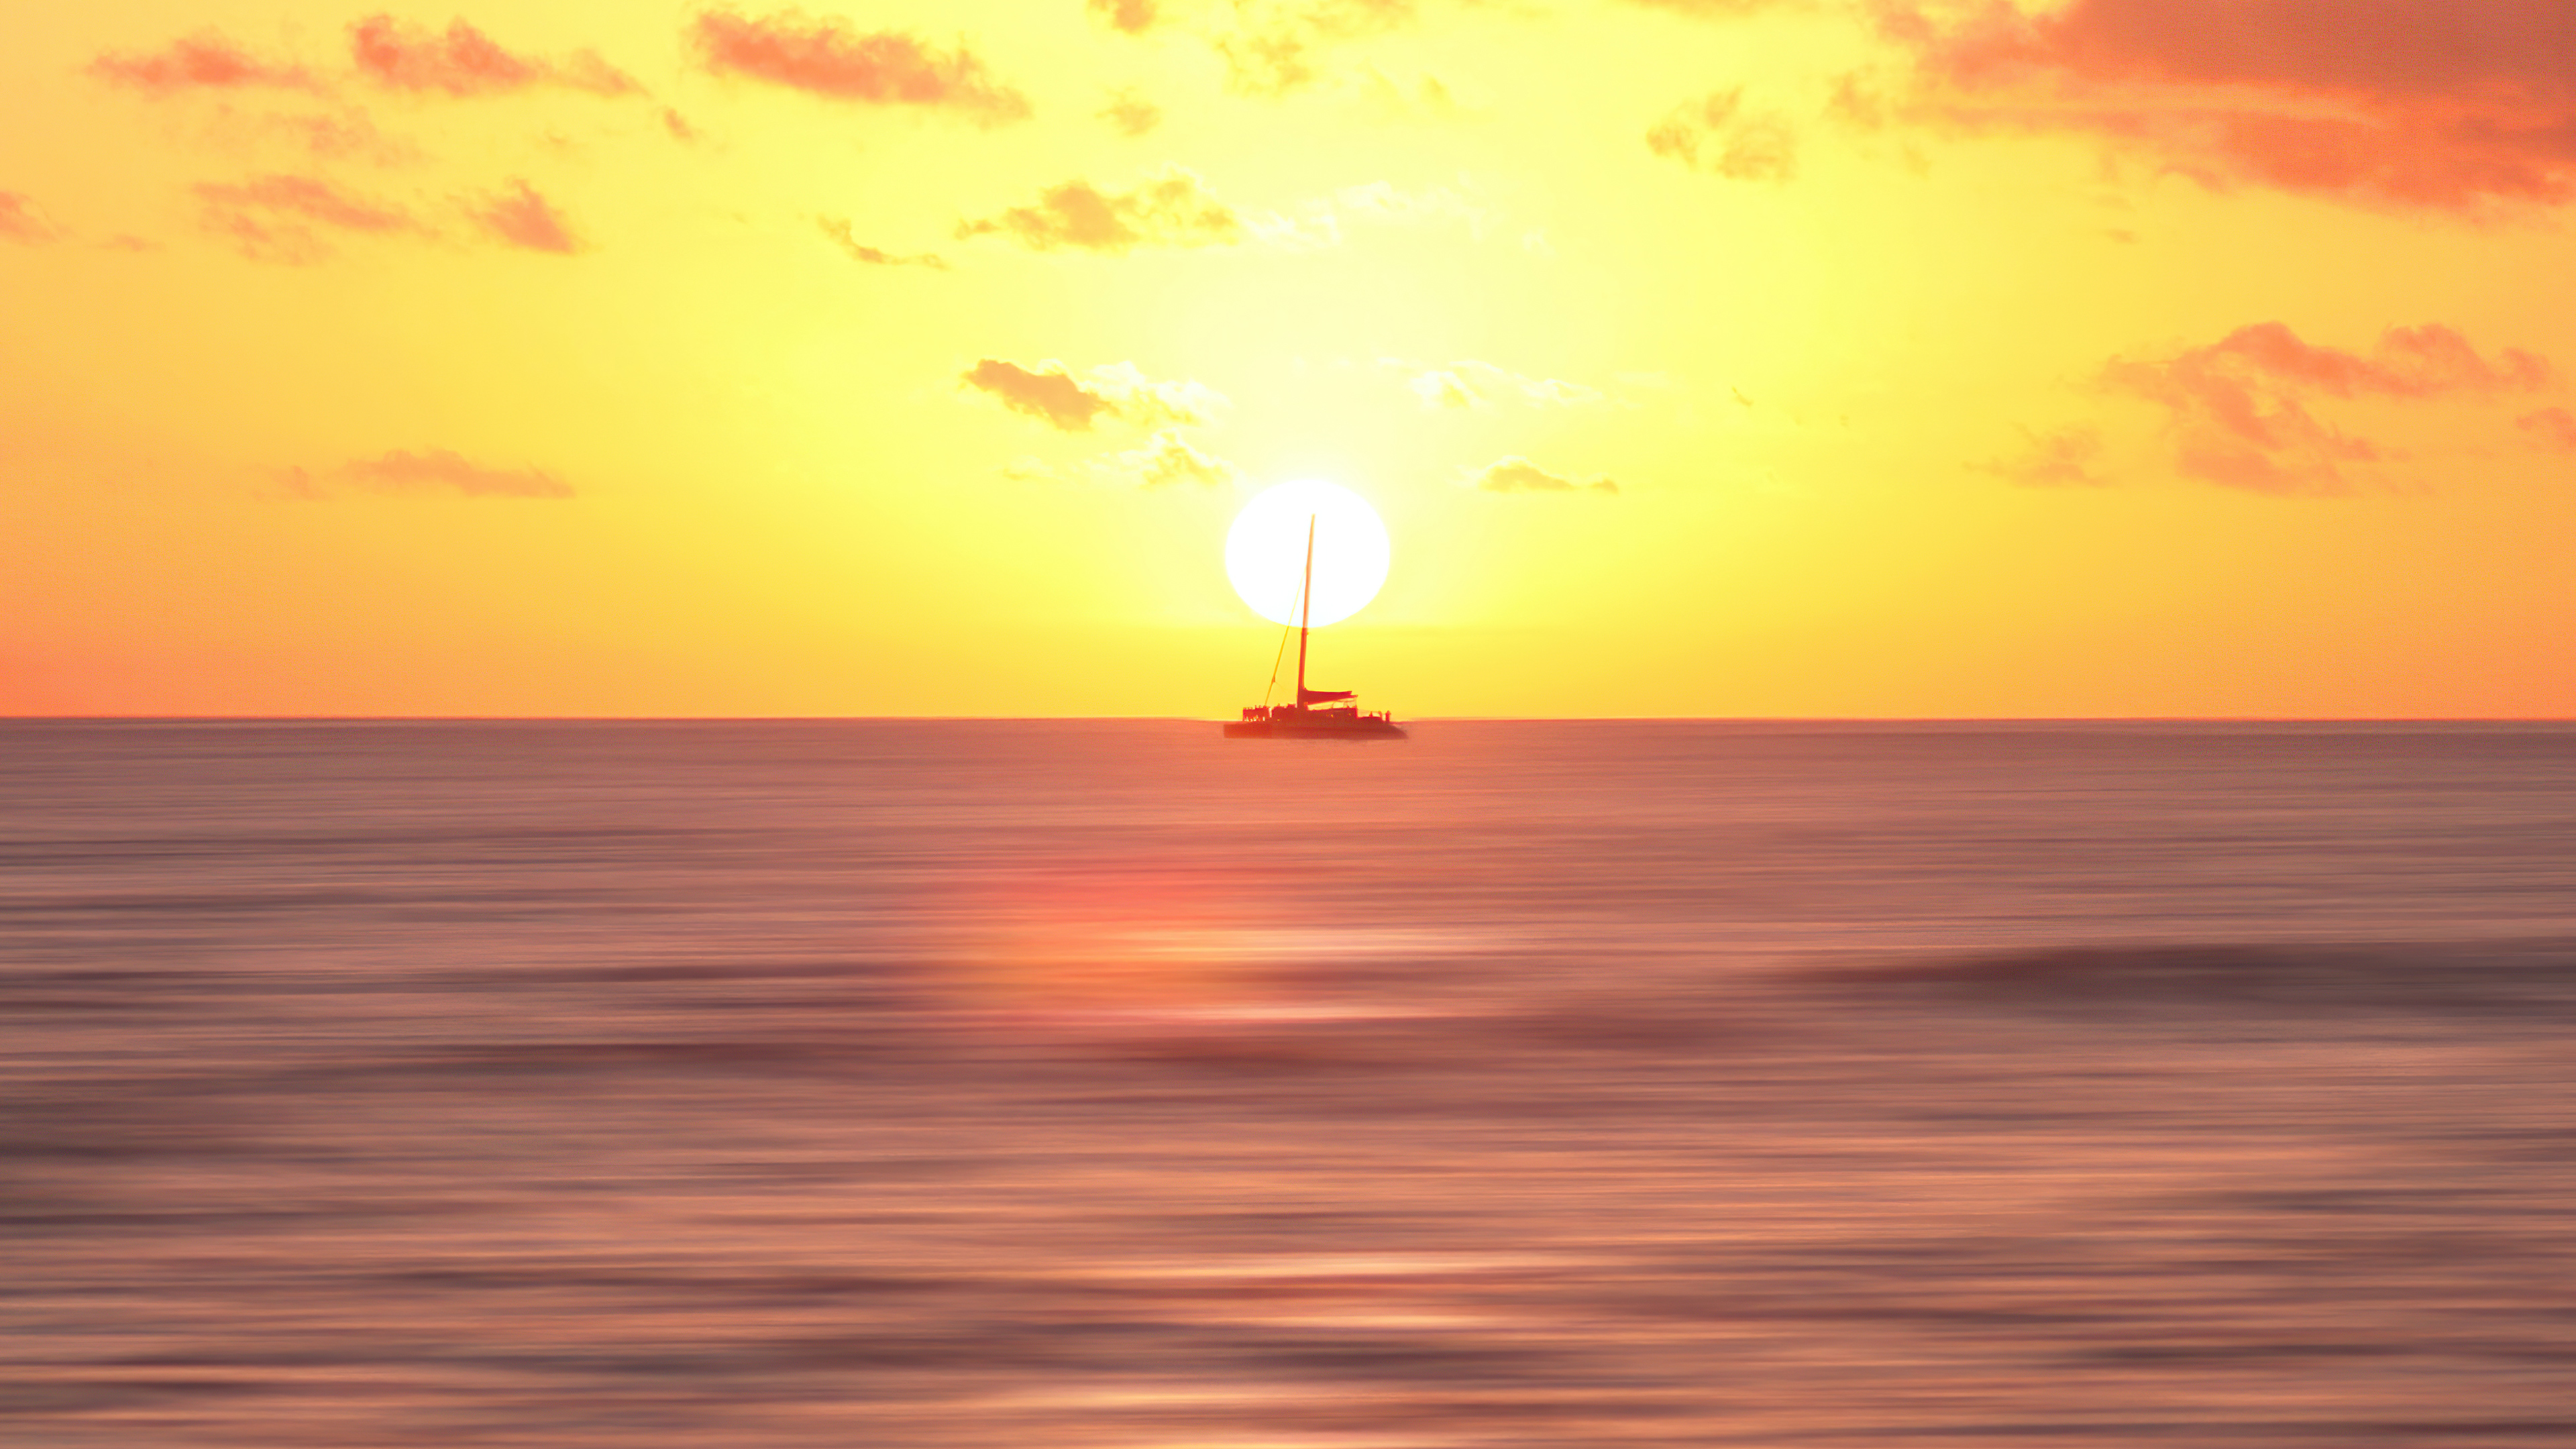 boat body of water sunset 4k 1644787550 - Boat Body Of Water Sunset 4k - Boat Body Of Water Sunset wallpapers, Boat Body Of Water Sunset 4k wallpapers